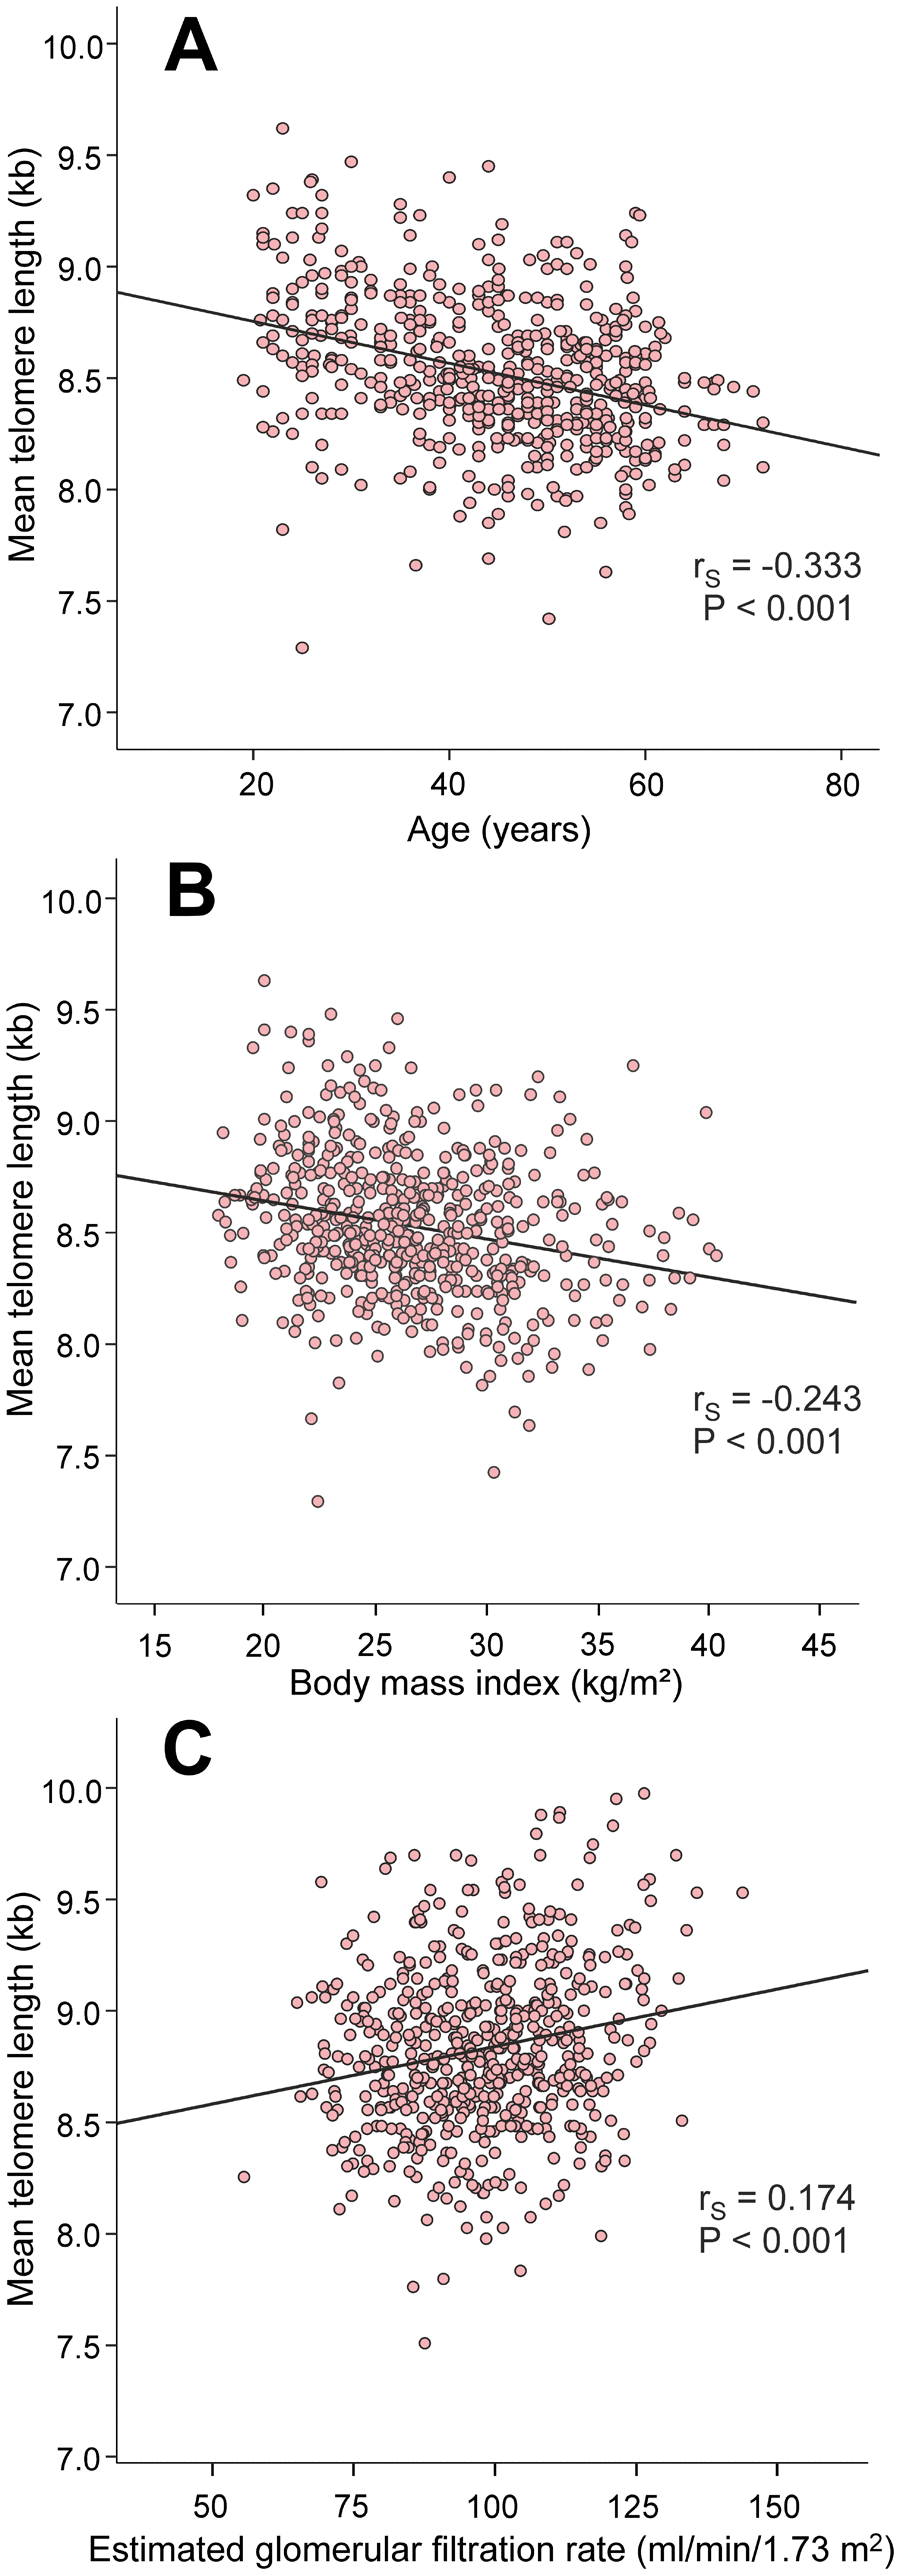 Scatter plots and Spearman correlations (rS) between age (A), body mass index (B), and estimated glomerular filtration rate (C), and mean leukocyte telomere length in the 566 study subjects.